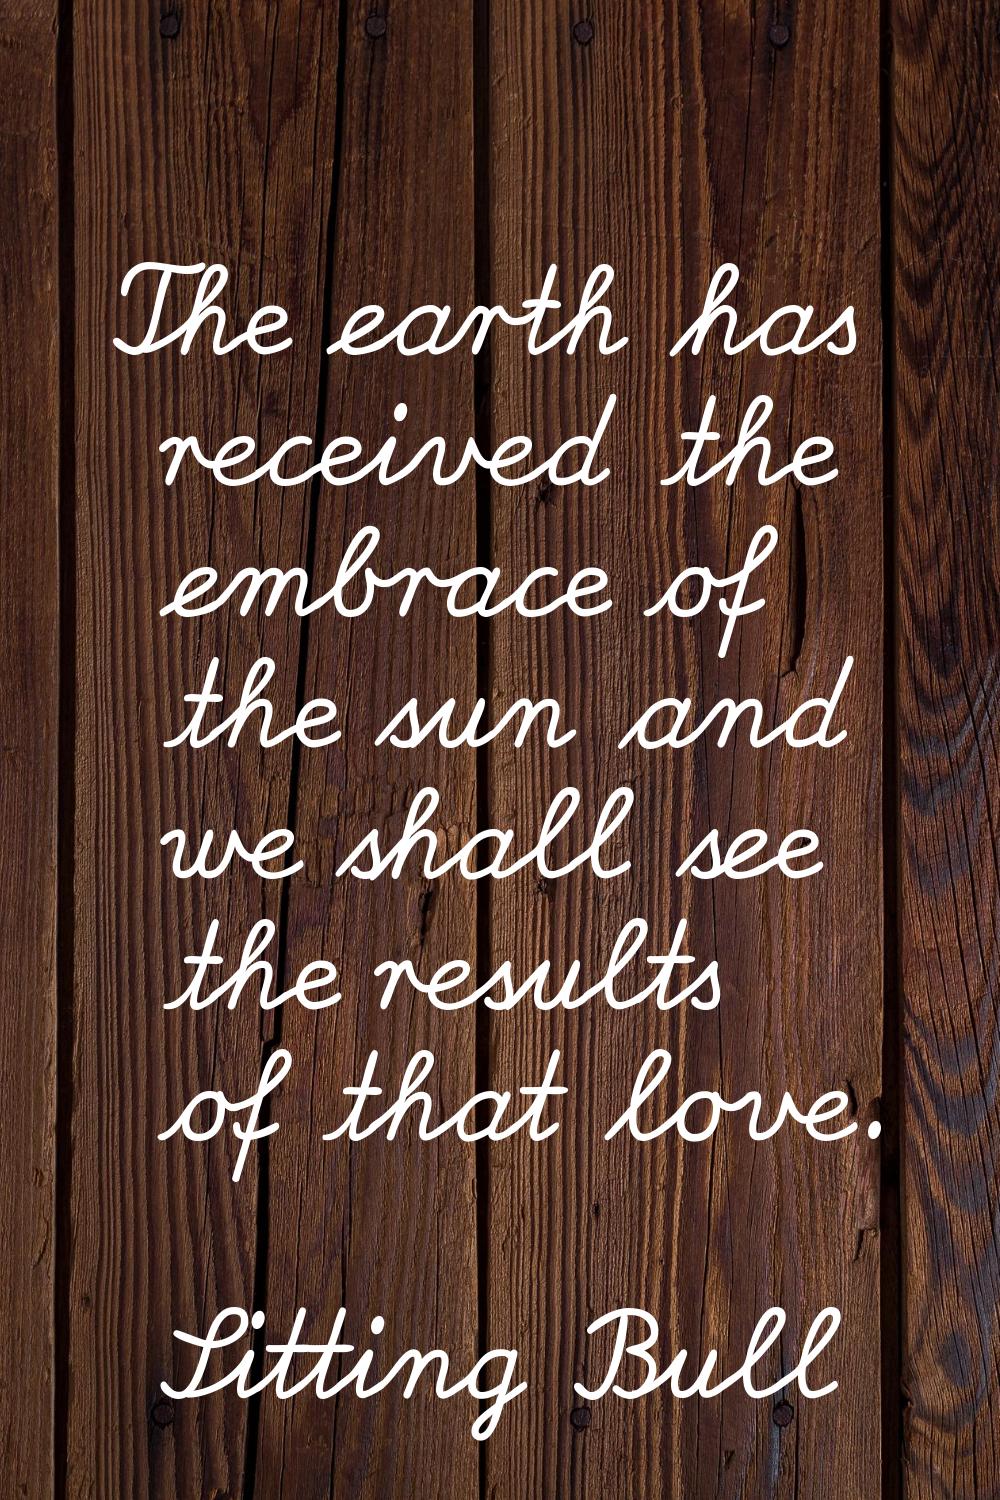 The earth has received the embrace of the sun and we shall see the results of that love.